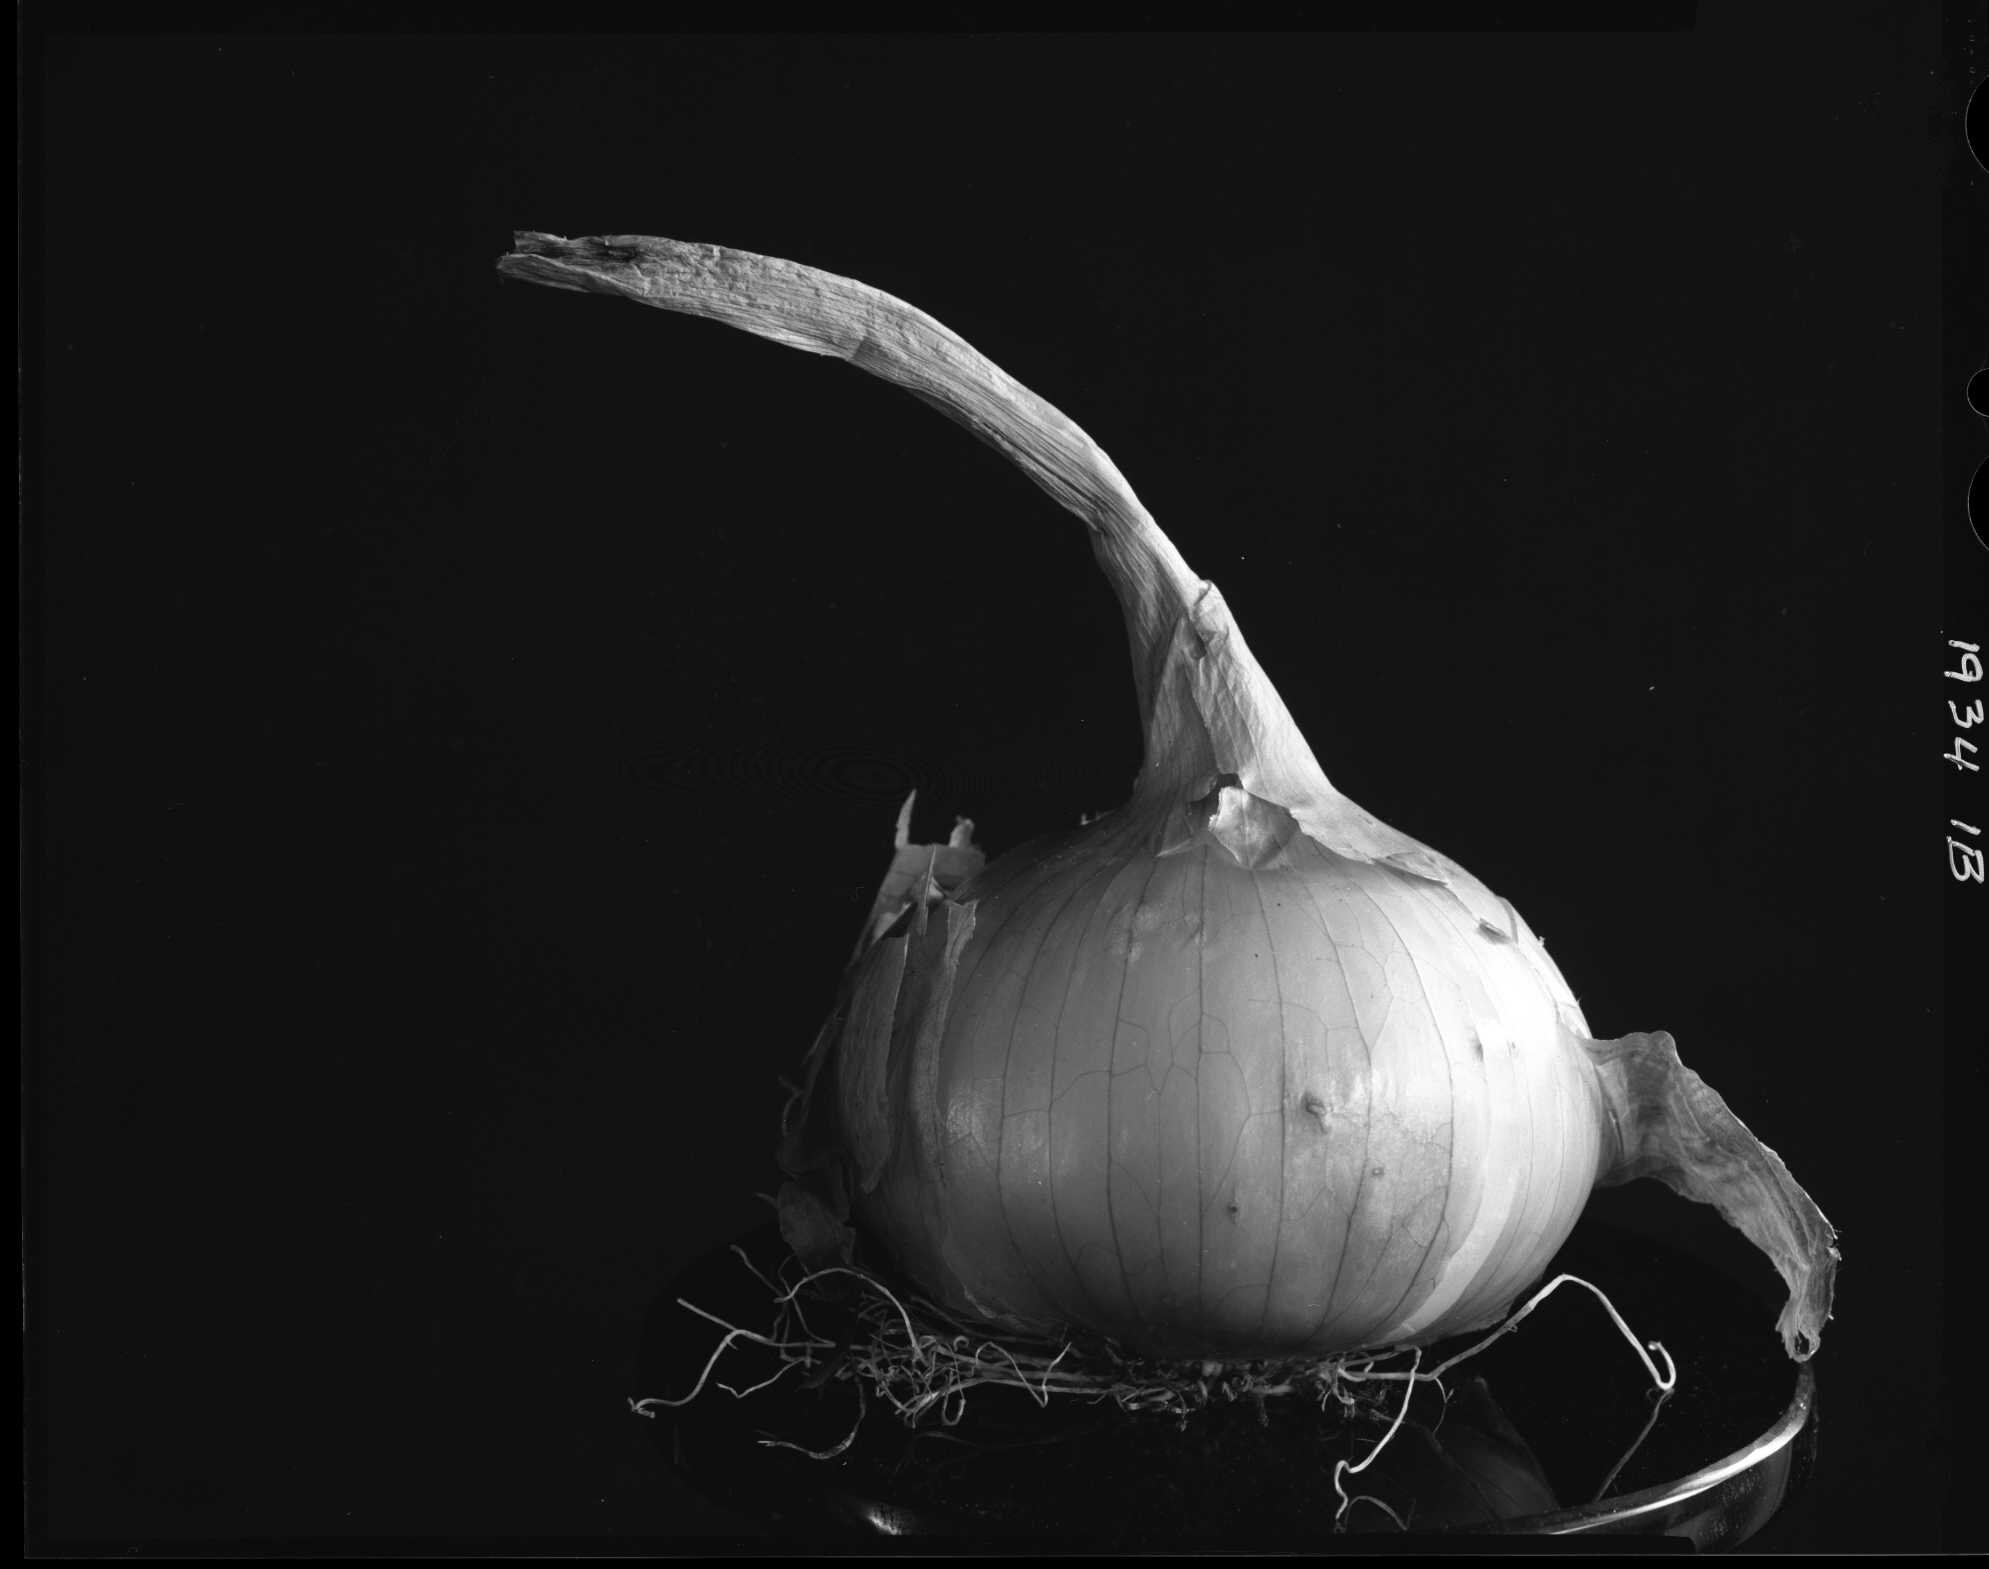  Onion, from the Produce Series 